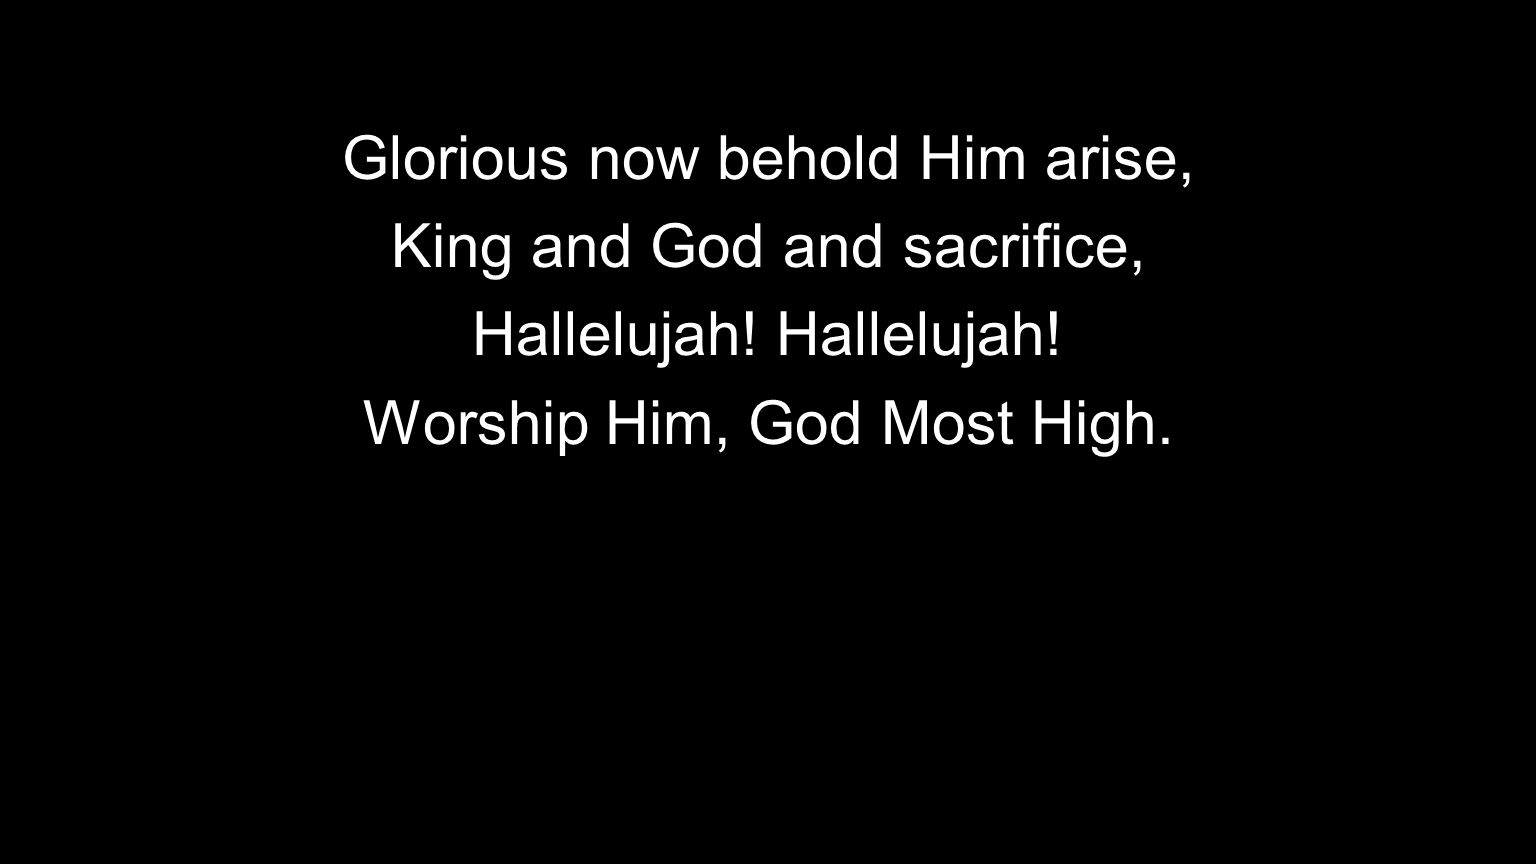 Glorious now behold Him arise, King and God and sacrifice,